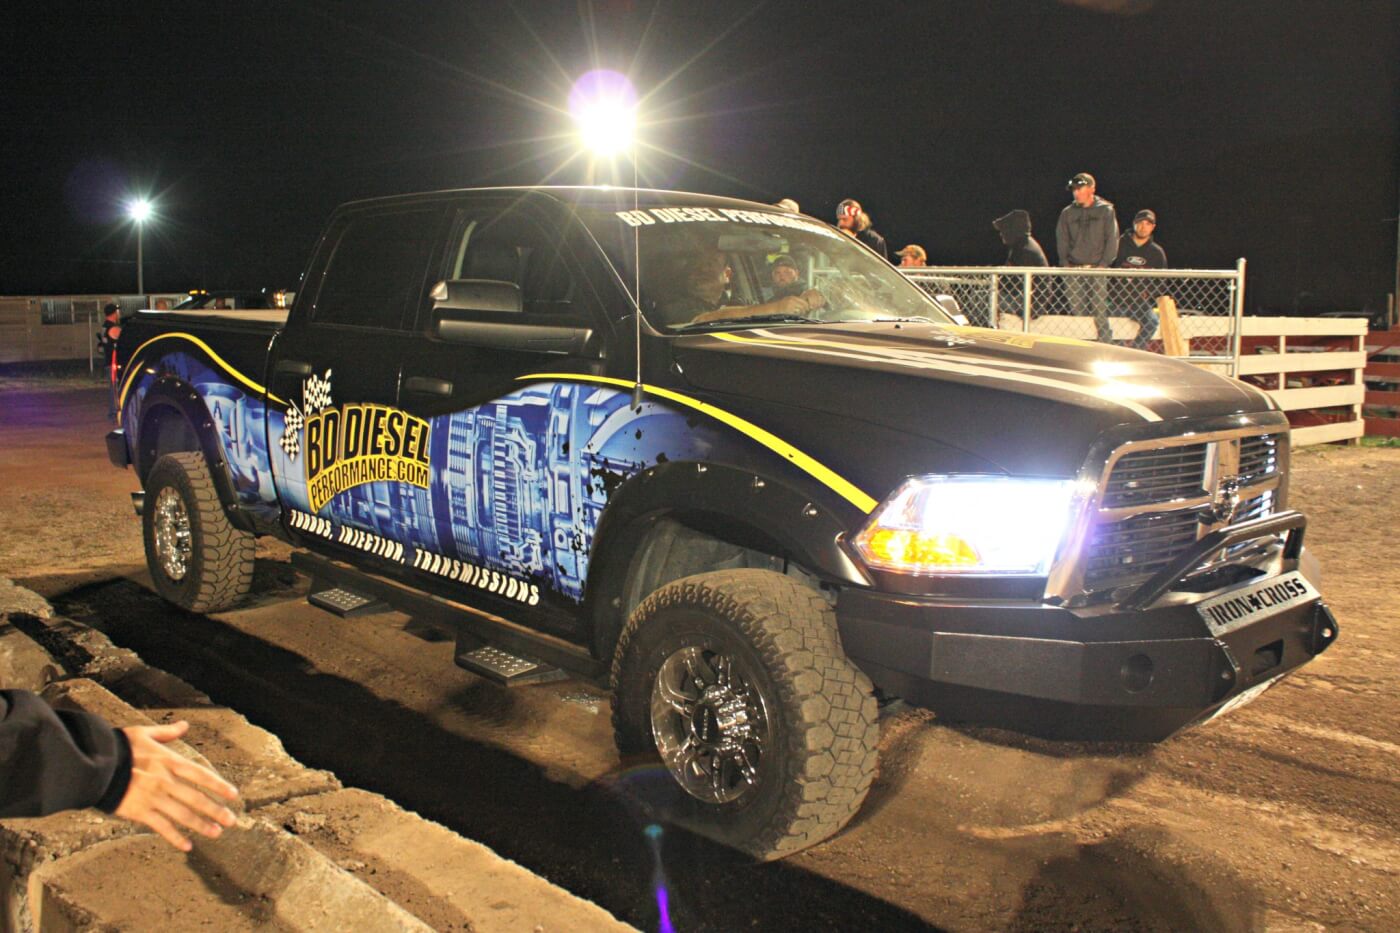 The crew at BD Diesel definitely knows how to market parts… plaster your name on the side of a truck equipped with your products and enter a dirt drag event. Chris Osborne of BD Diesel took this Dodge clear to the final round where he took the big win against Chris Rosscup’s 2002 Duramax.